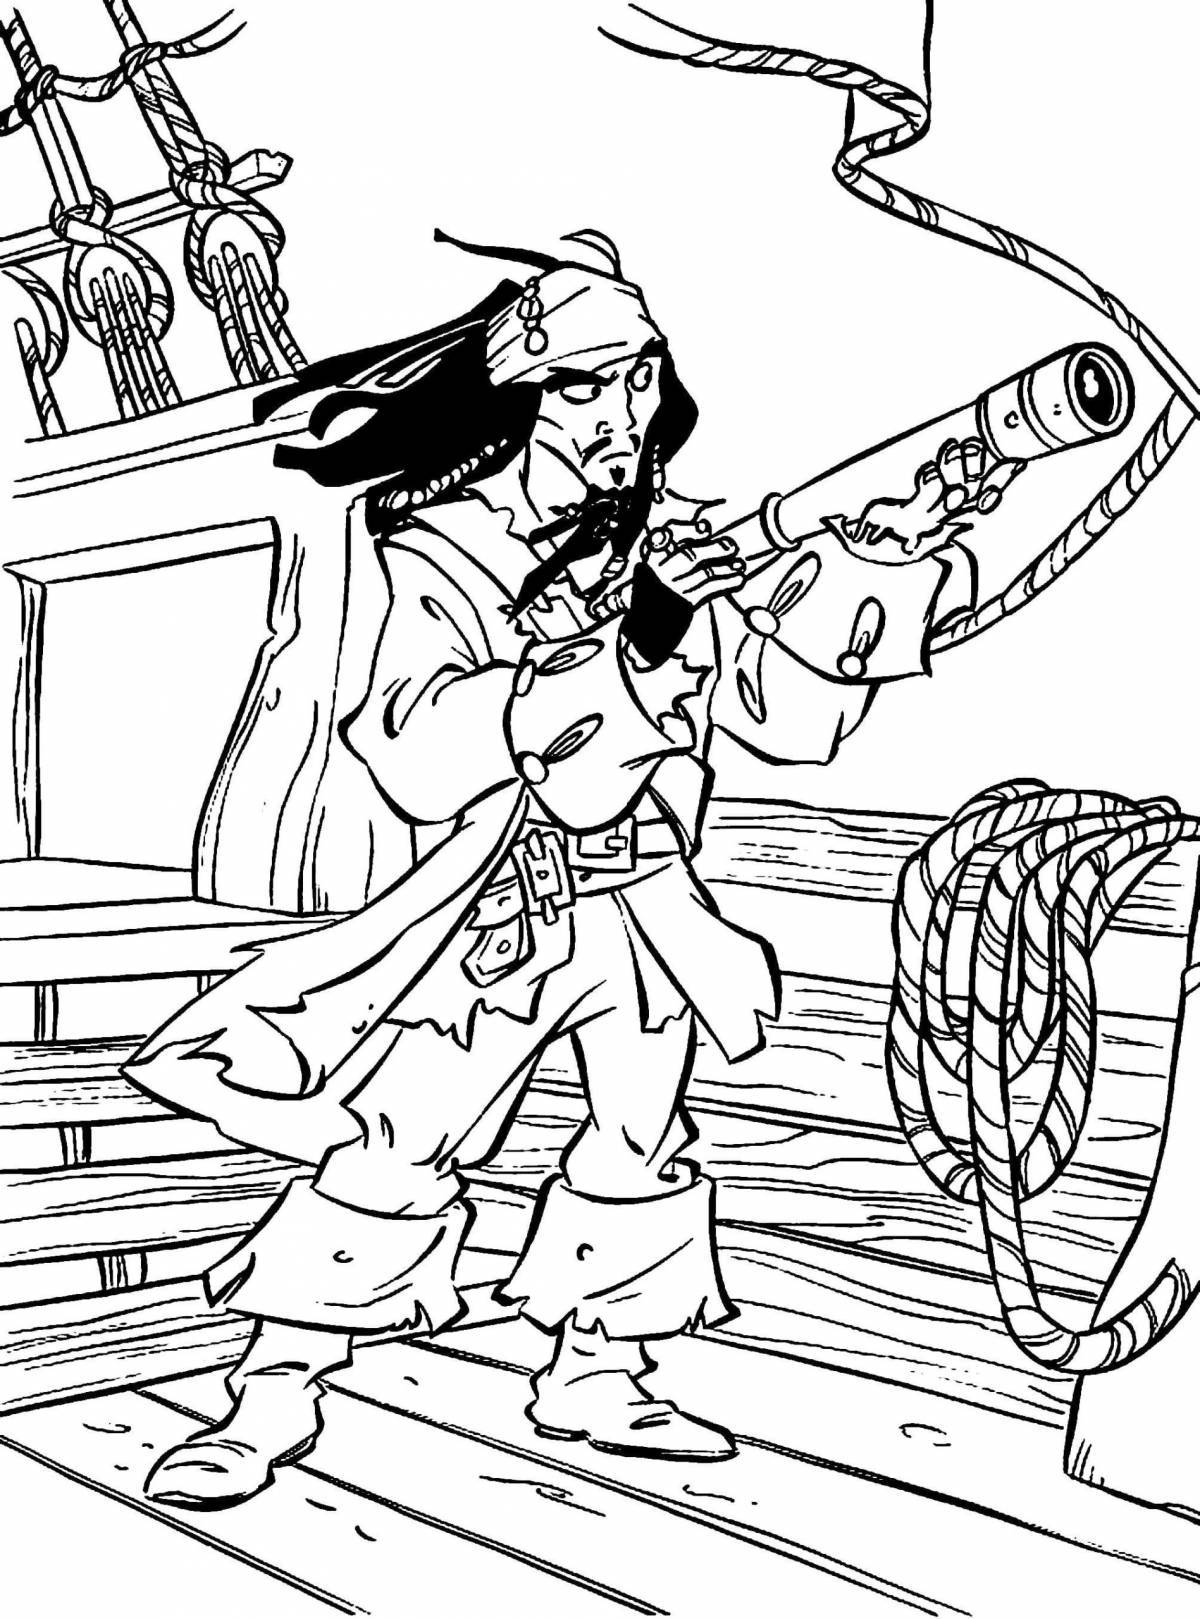 Charming jack sparrow coloring book